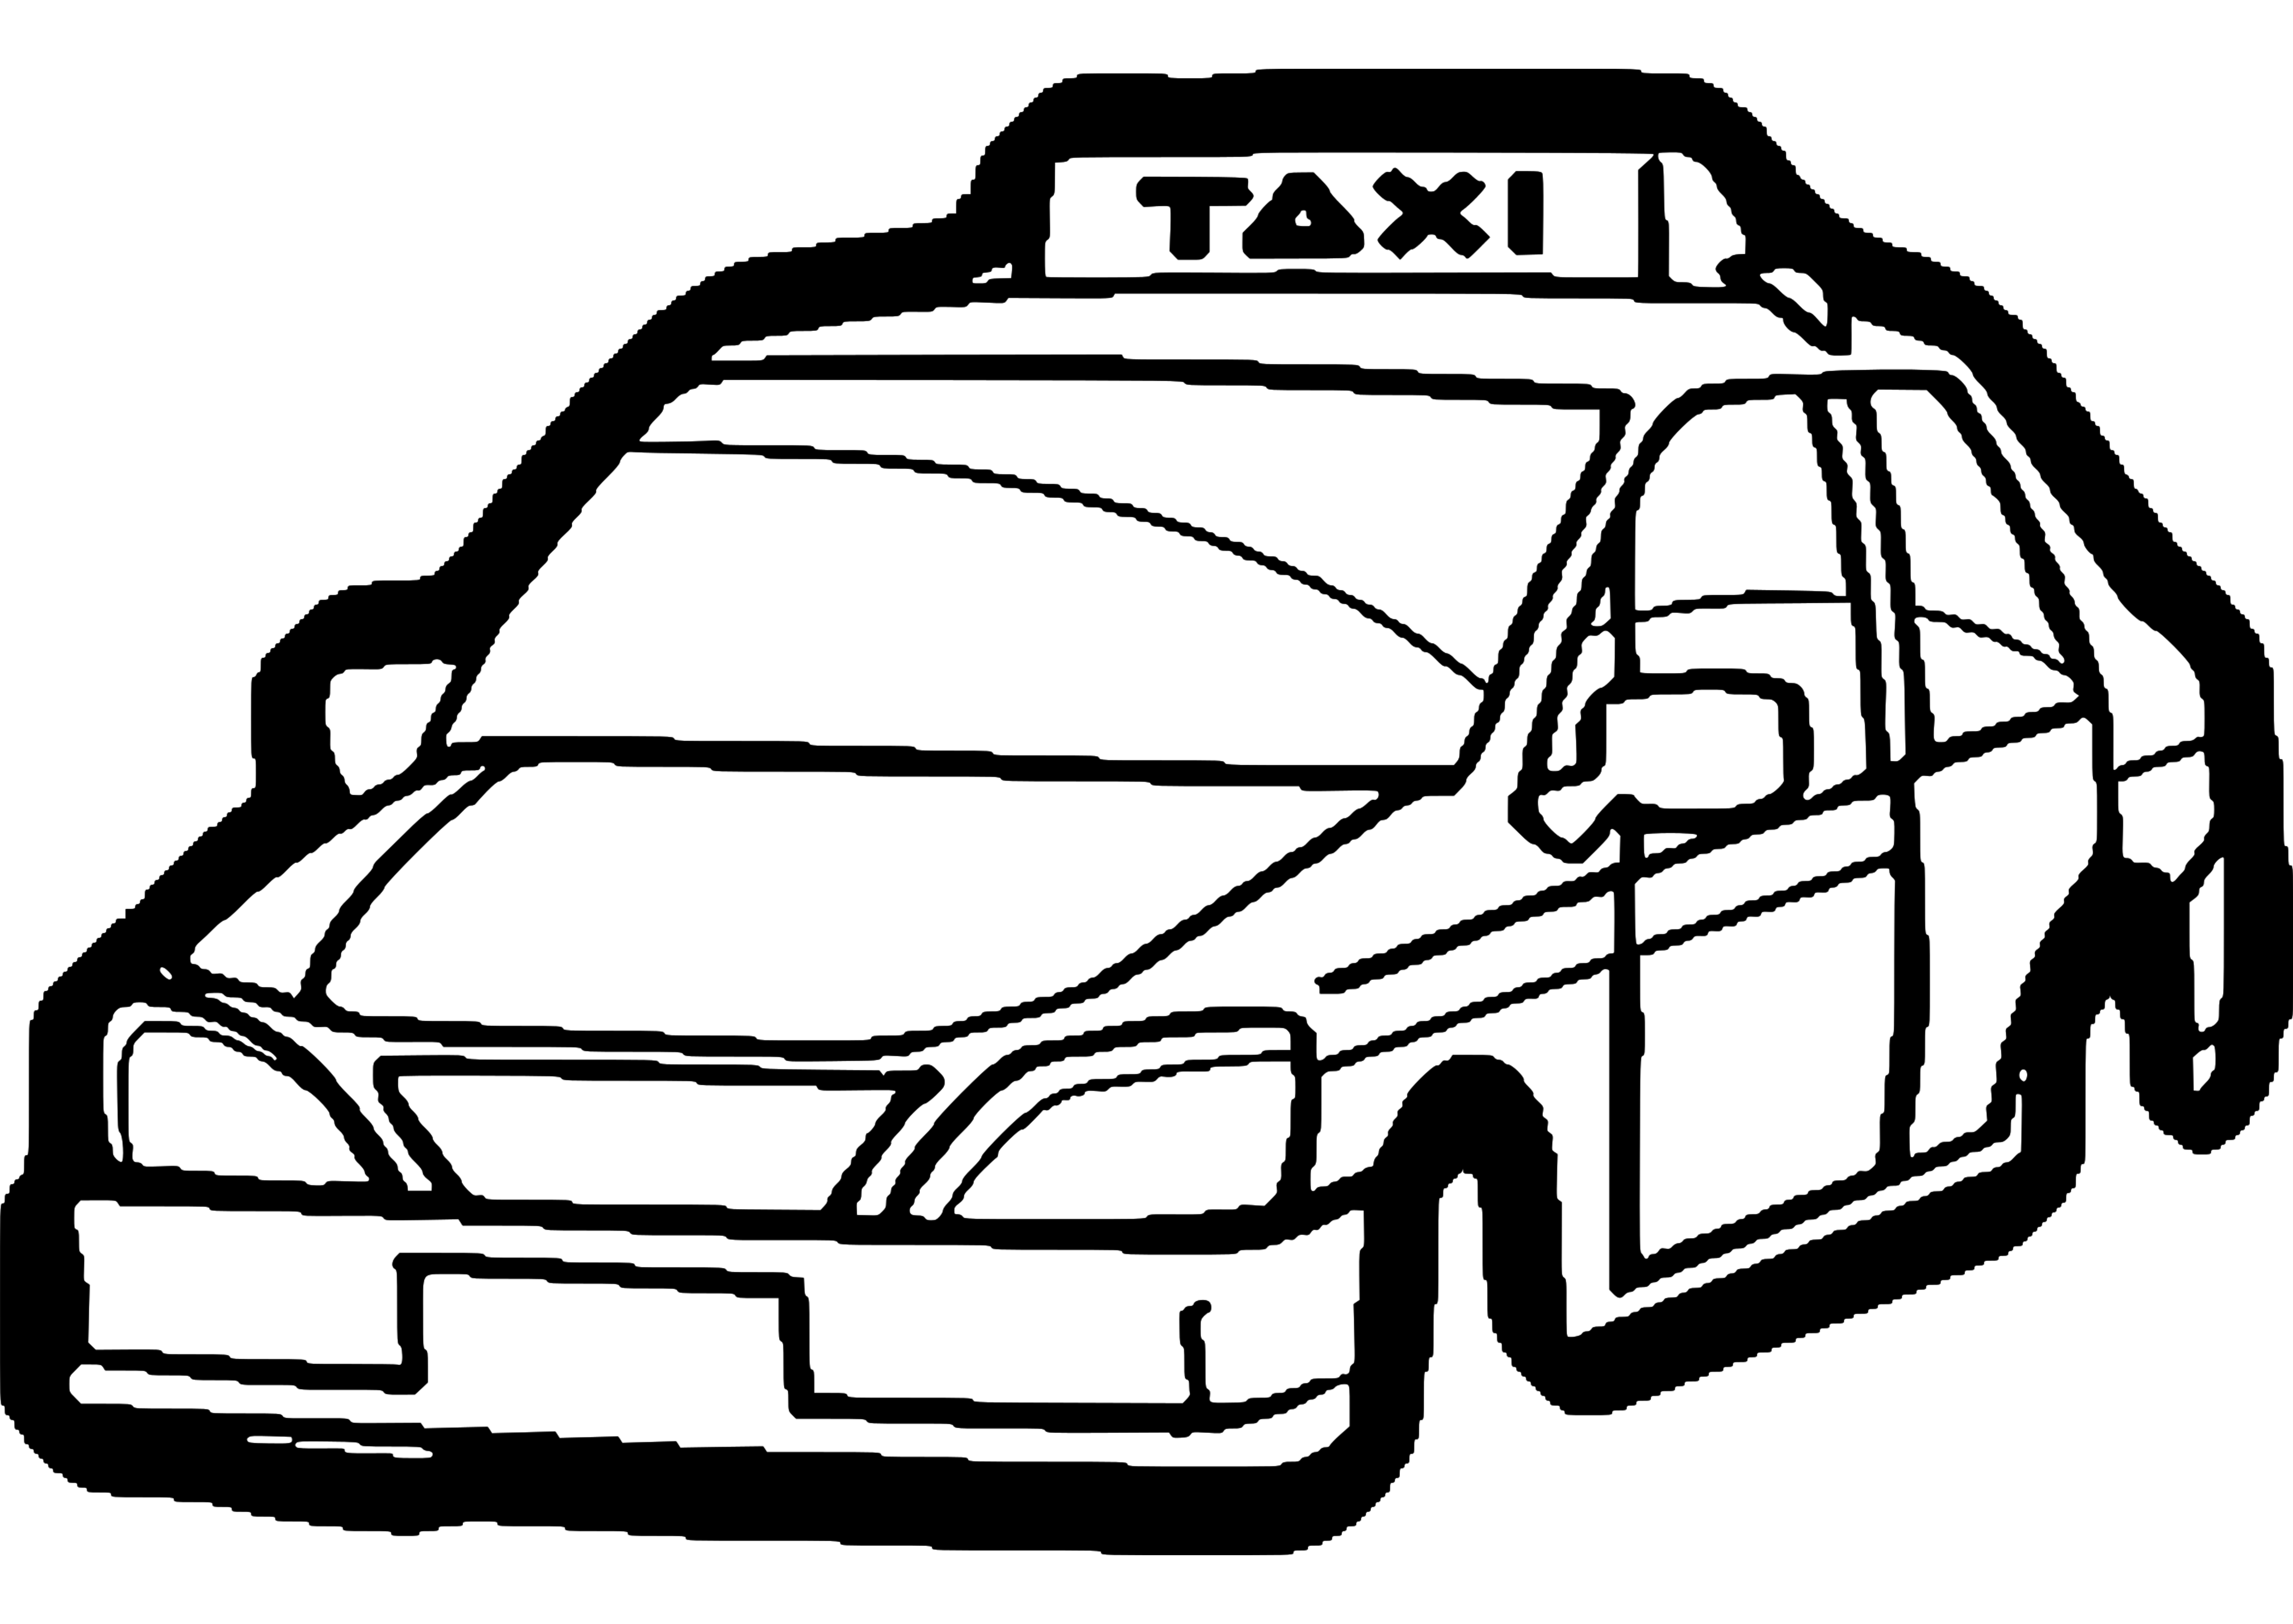 Taxi 137221 Transportation – Printable coloring pages